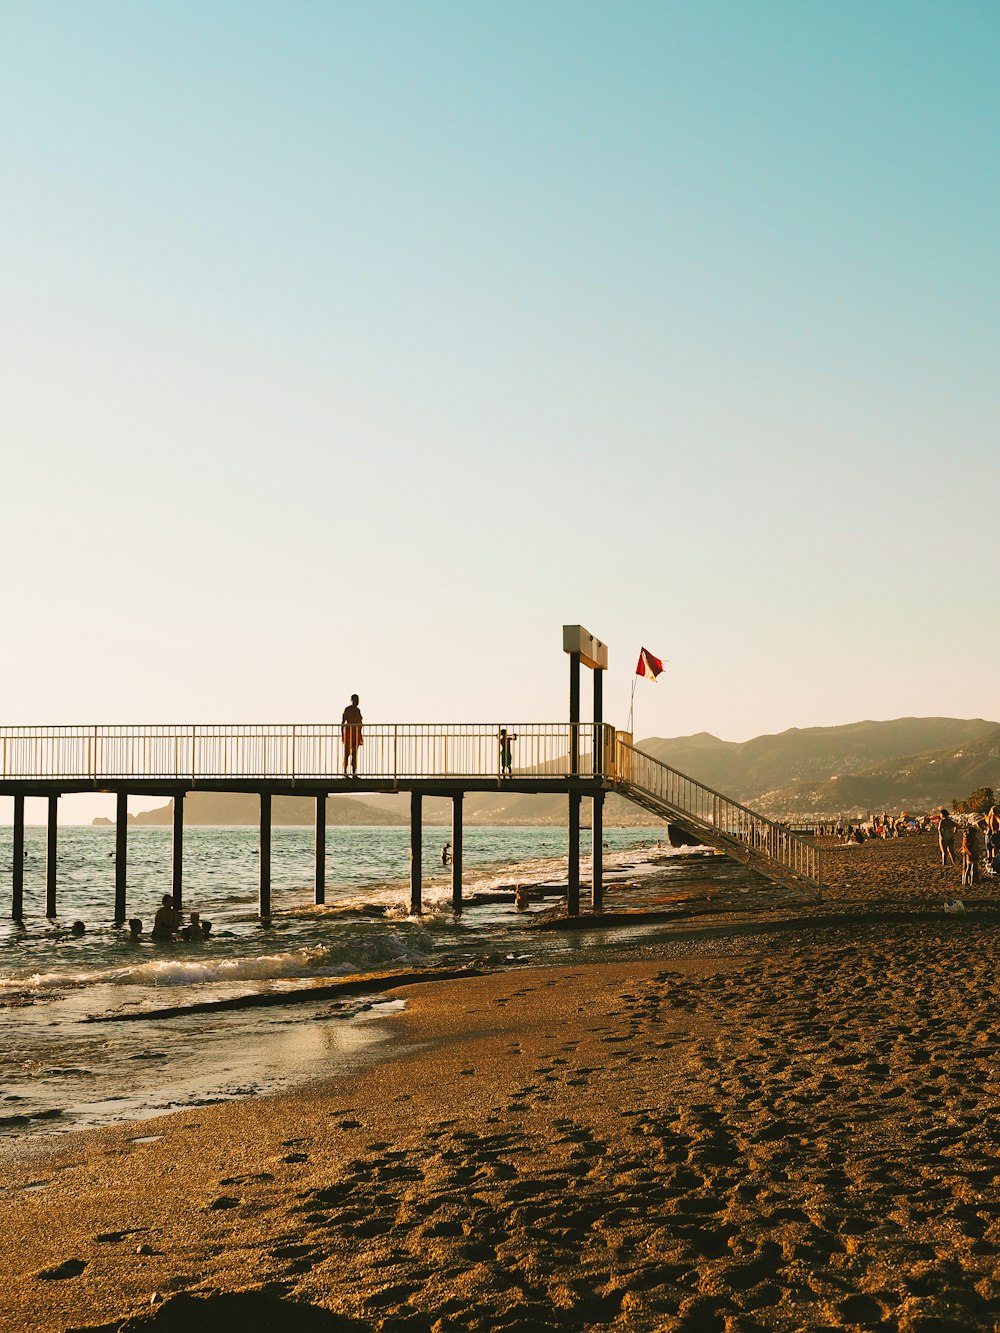 people are standing on a pier at the beach